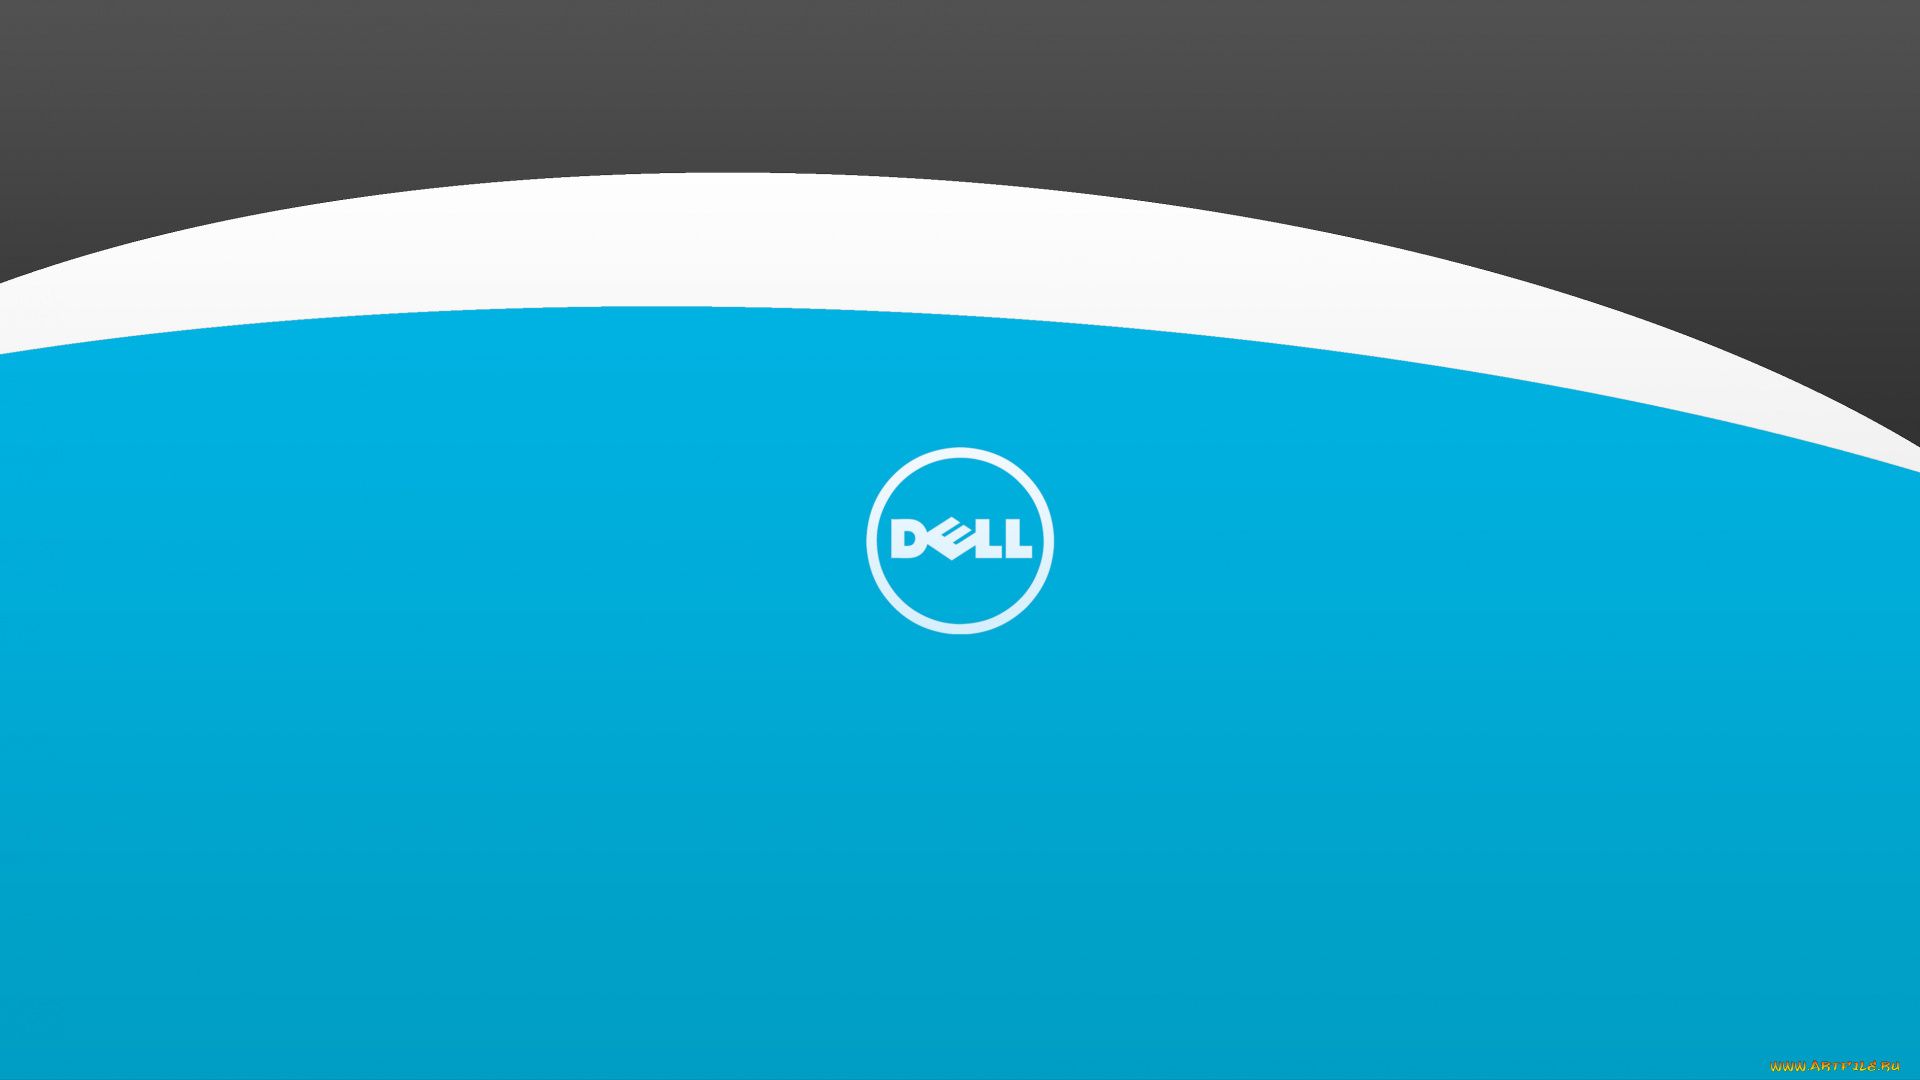 Dell free background